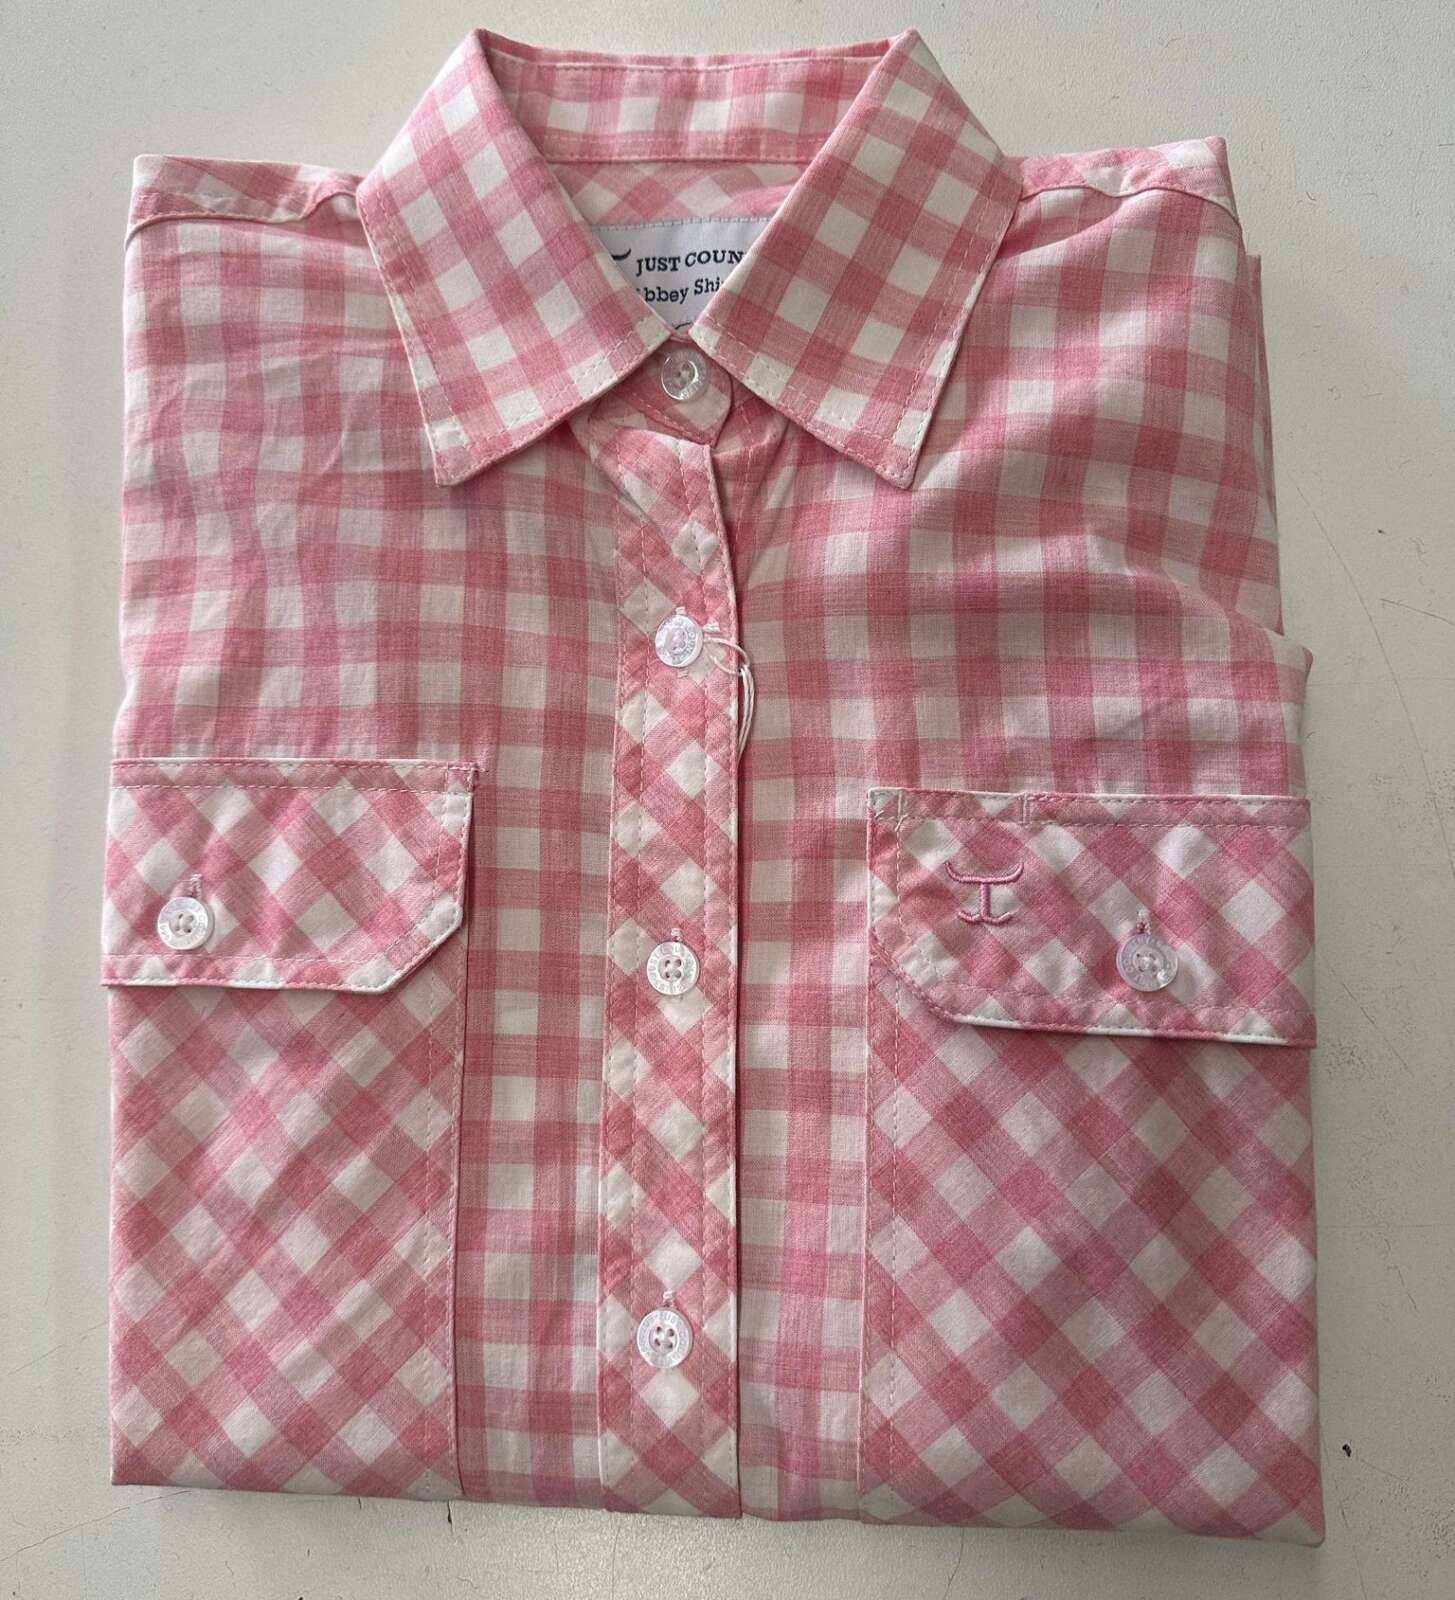 Just Country Women’s Abbey Full Button Workshirt – Flamingo Pink Check